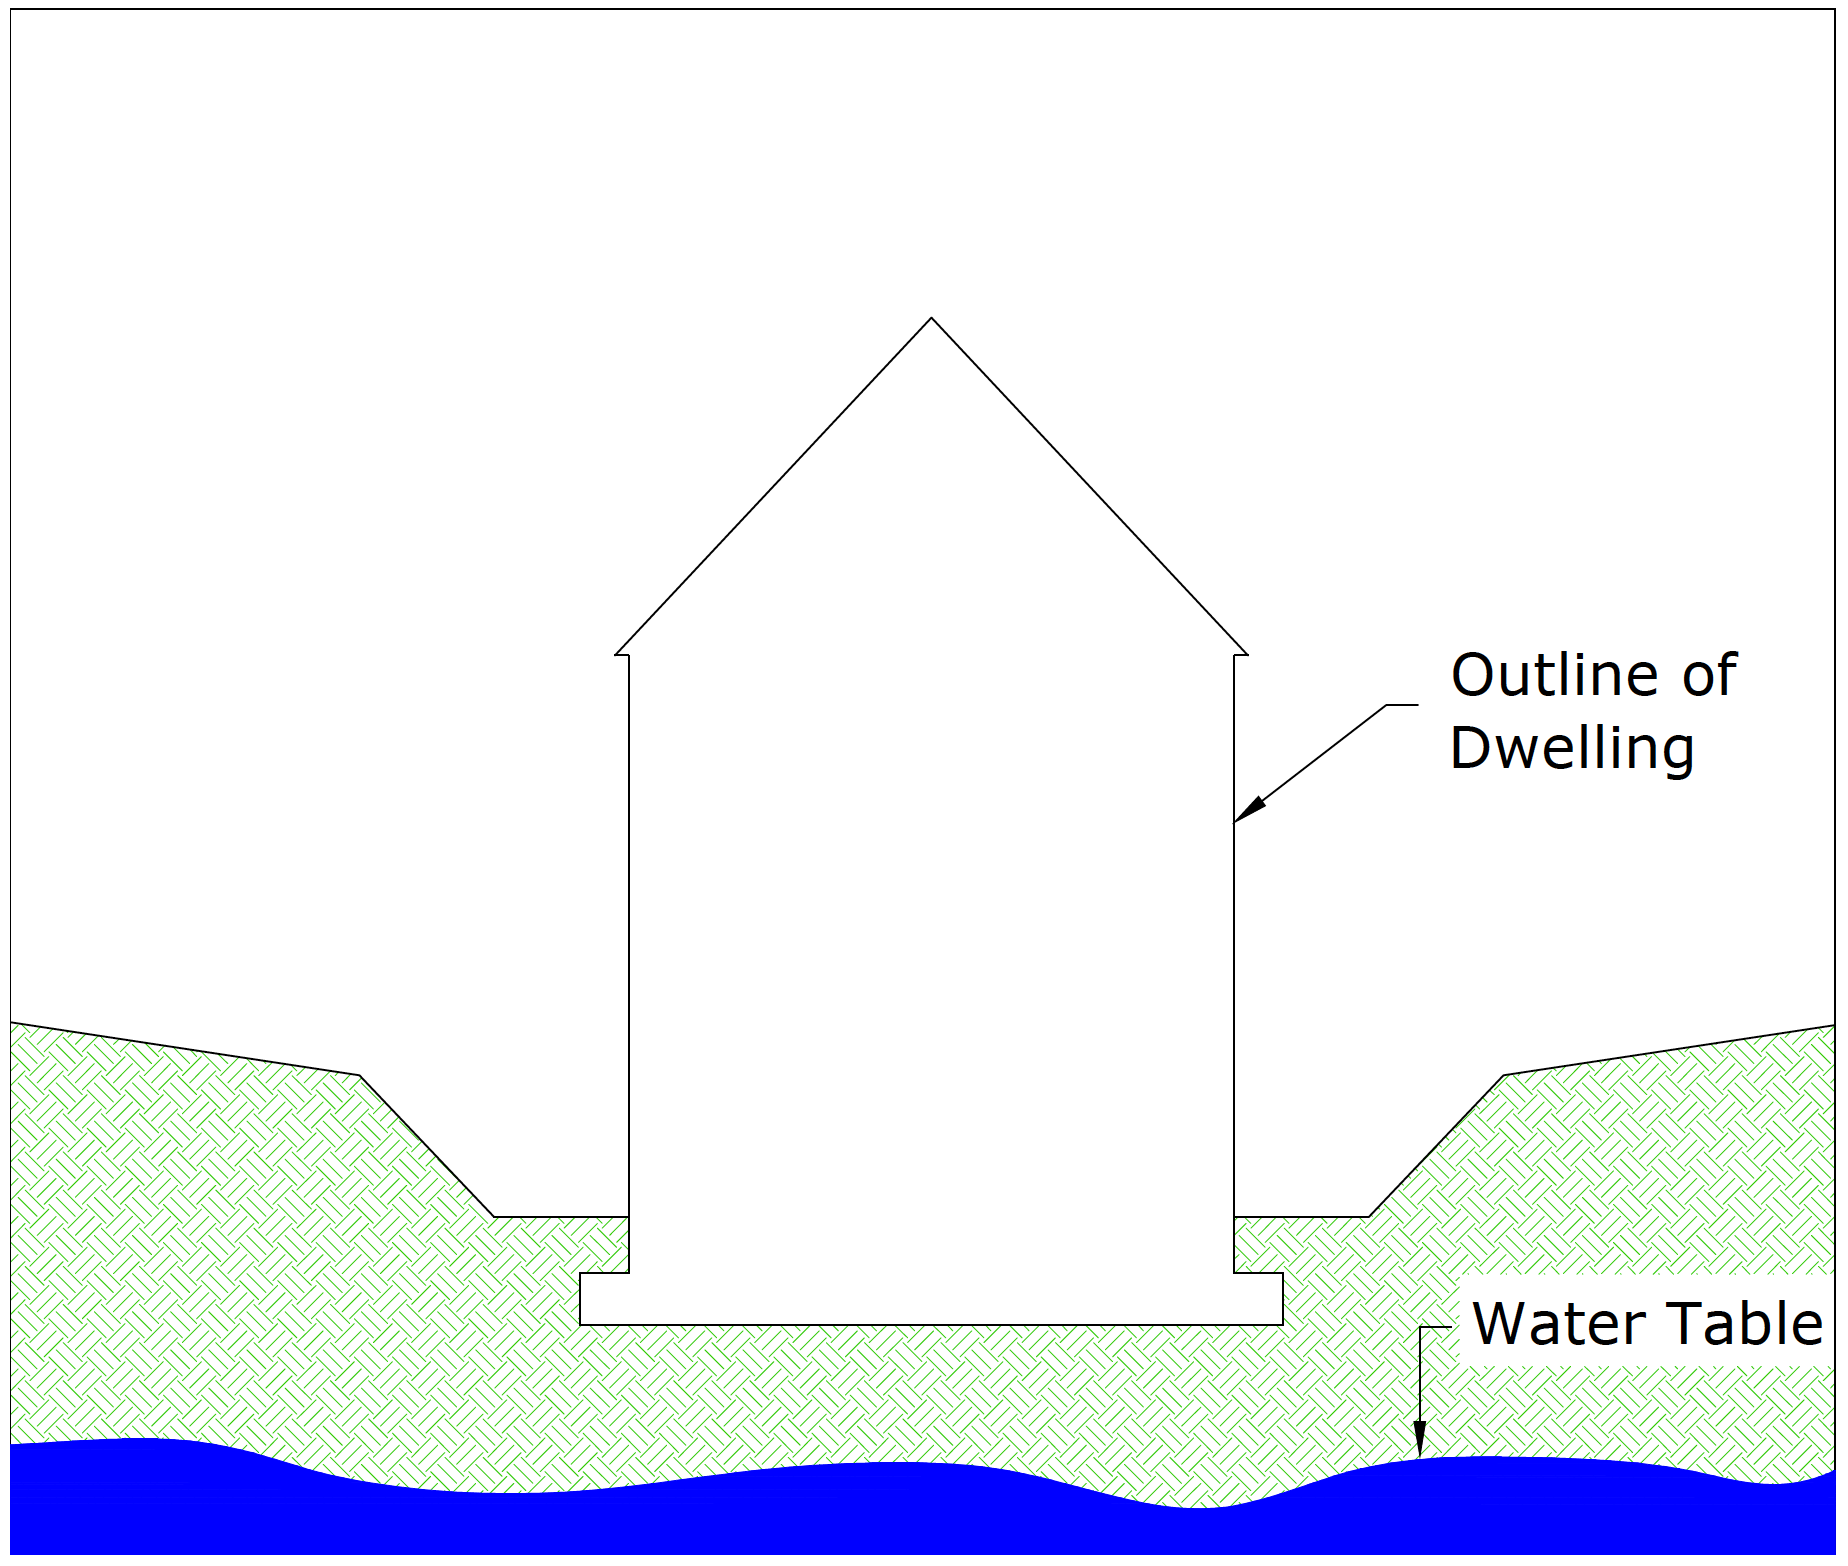 Diagram A5 - Water table with respect to potential dwellings